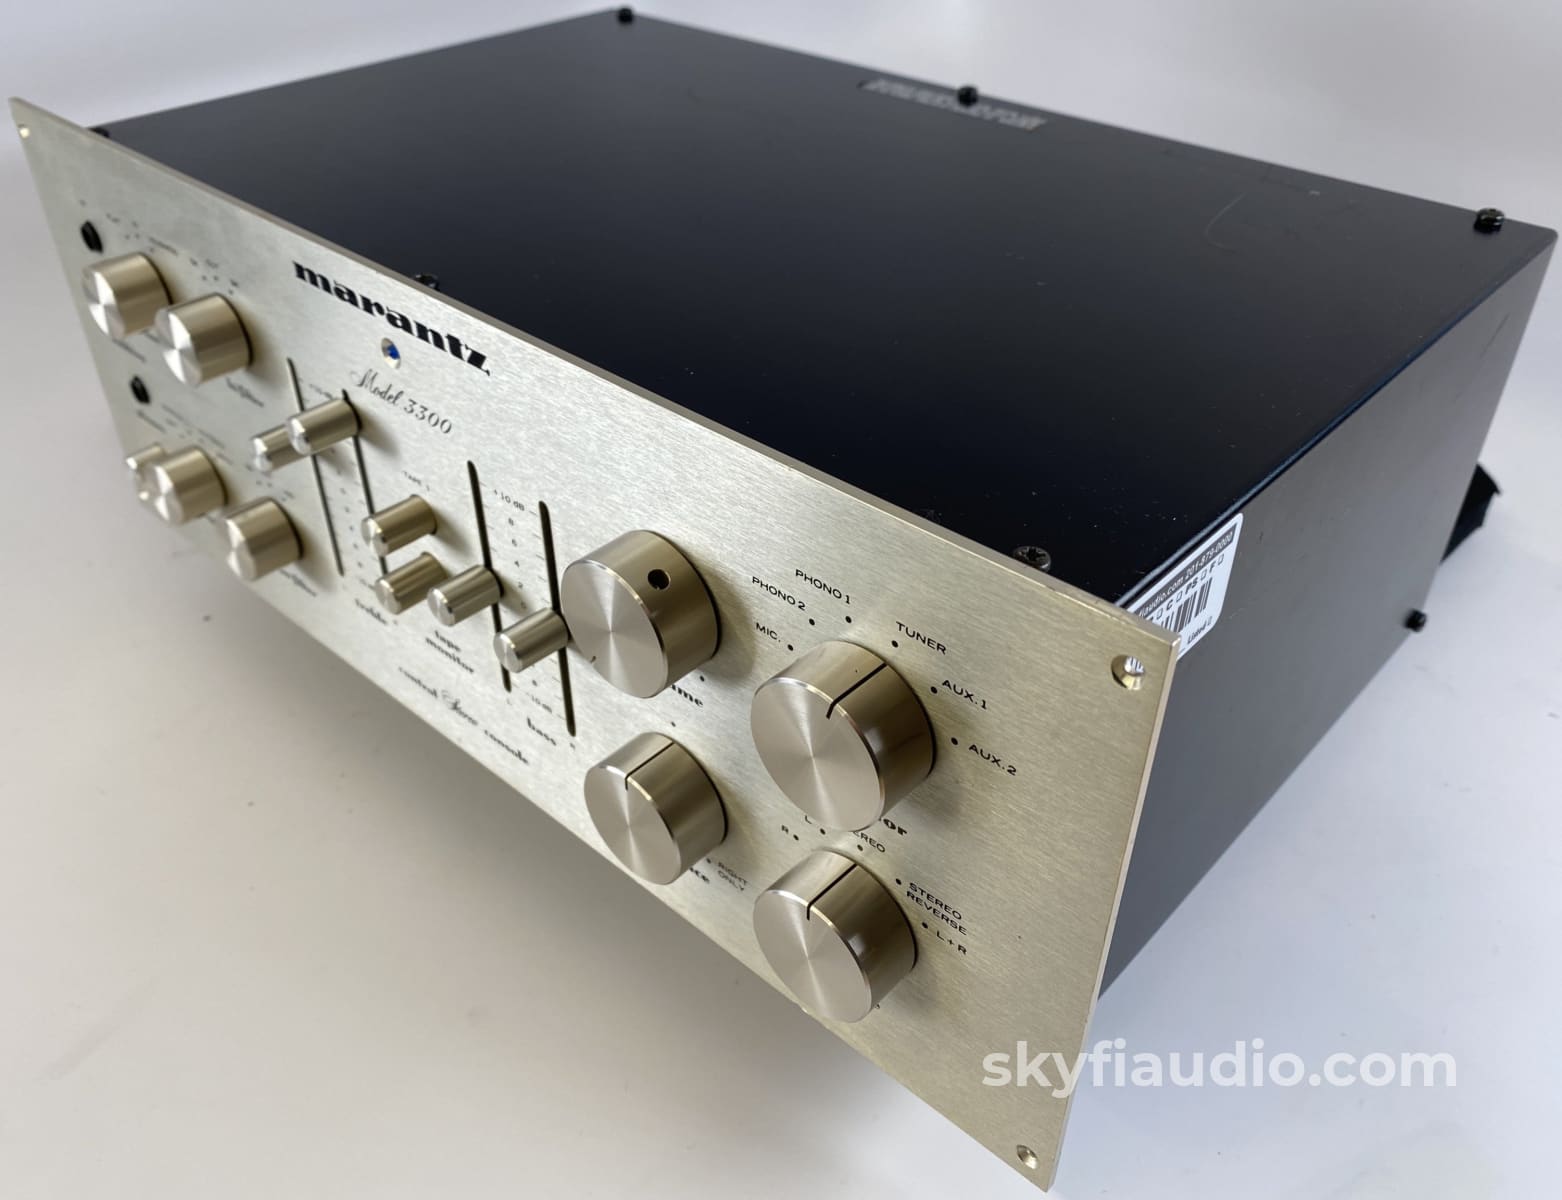 Marantz Model 3300 Preamplifier - Stereophonic Control Console From 1973